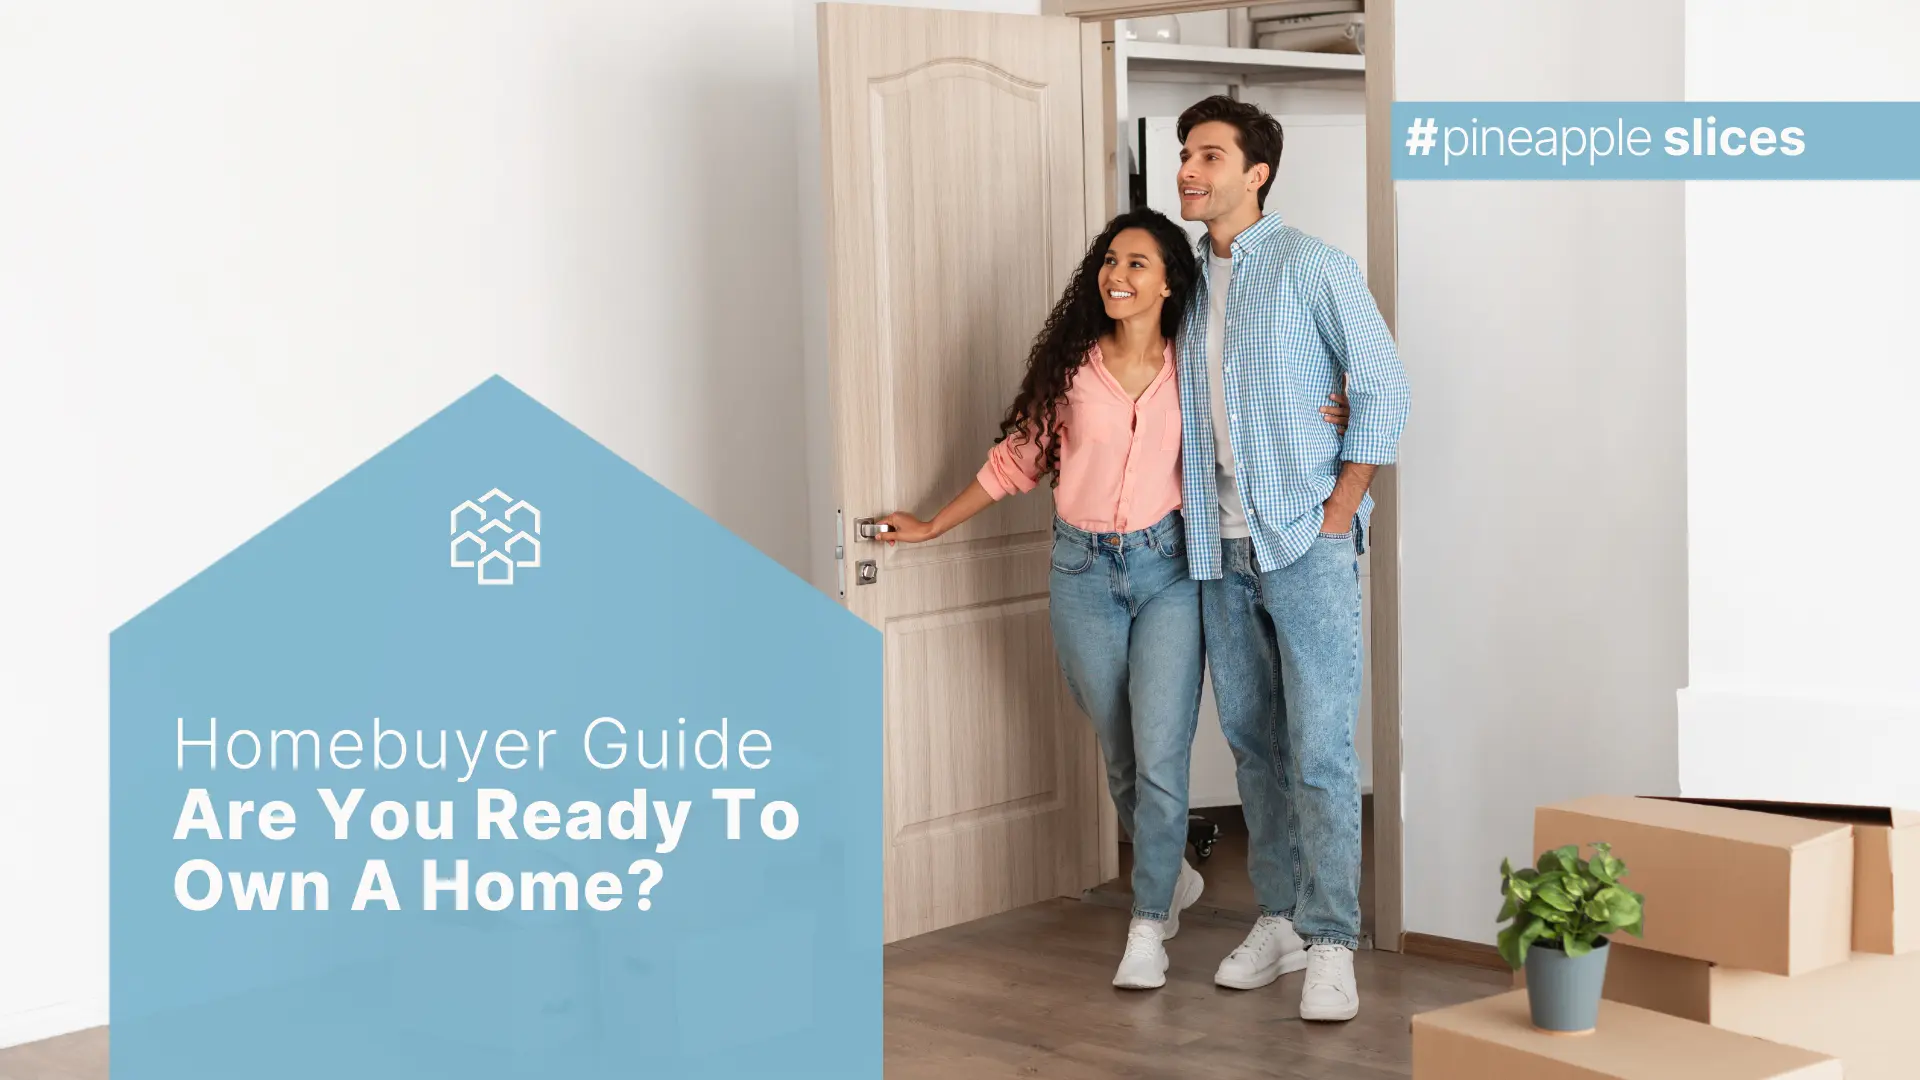 Homebuyer Guide - Are You Ready To Own A Home?